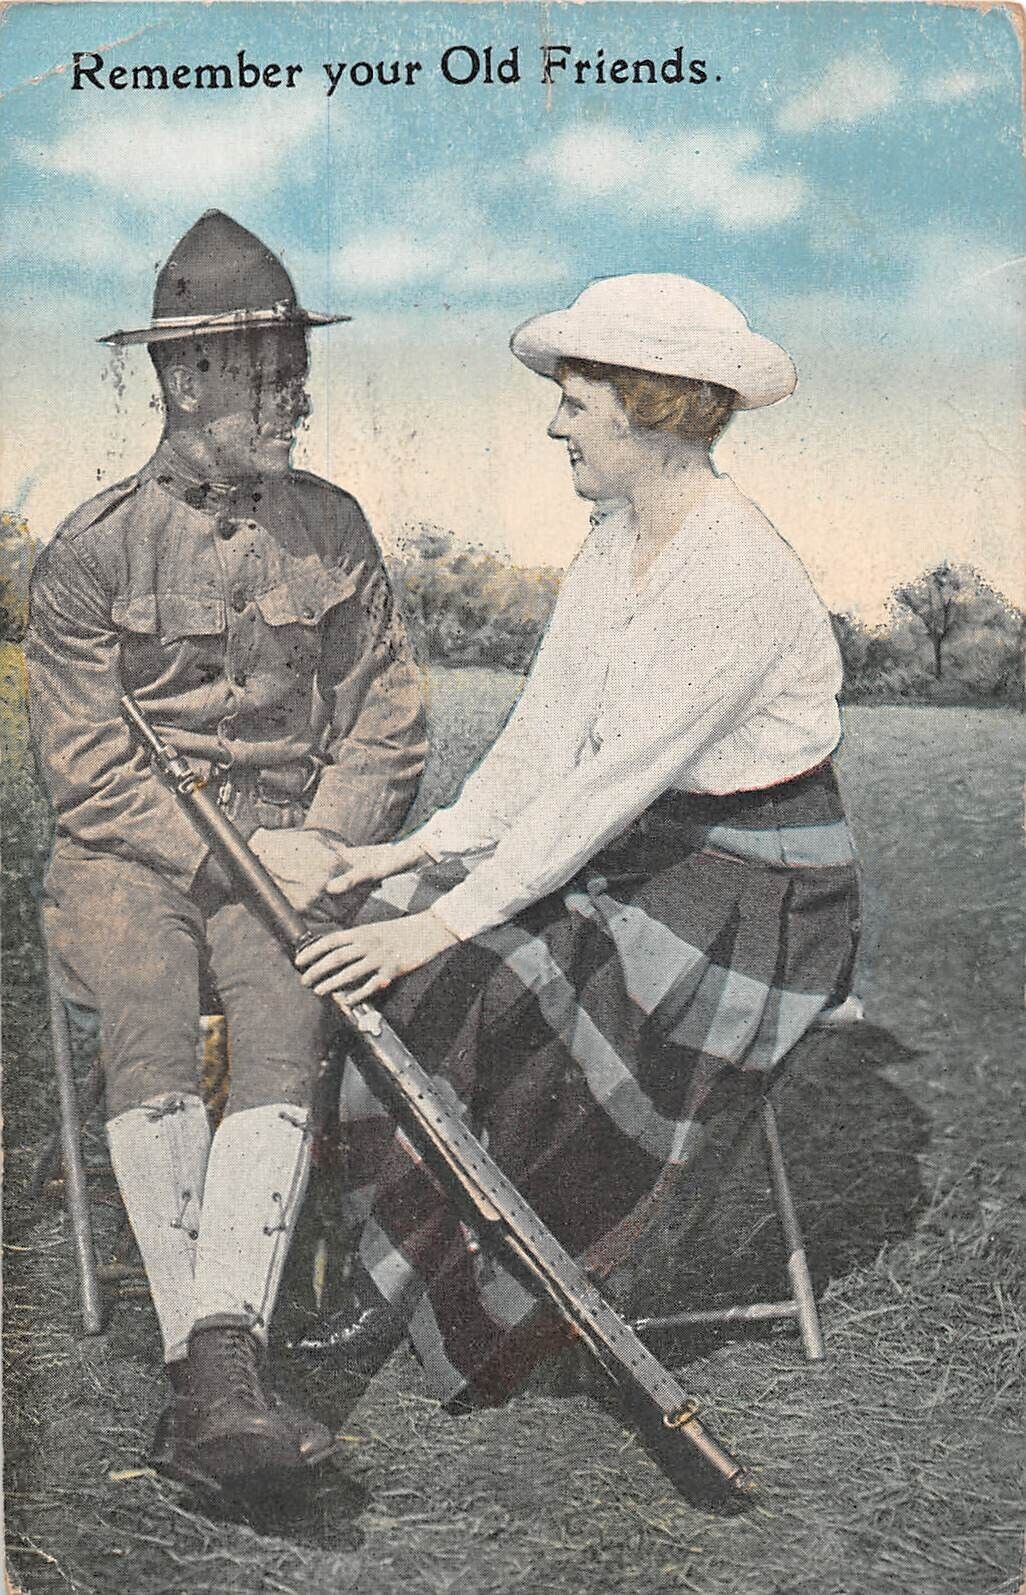 1918 Patriotic PC of Pretty Lady Flirting With Soldier-Remember Your Old Friends